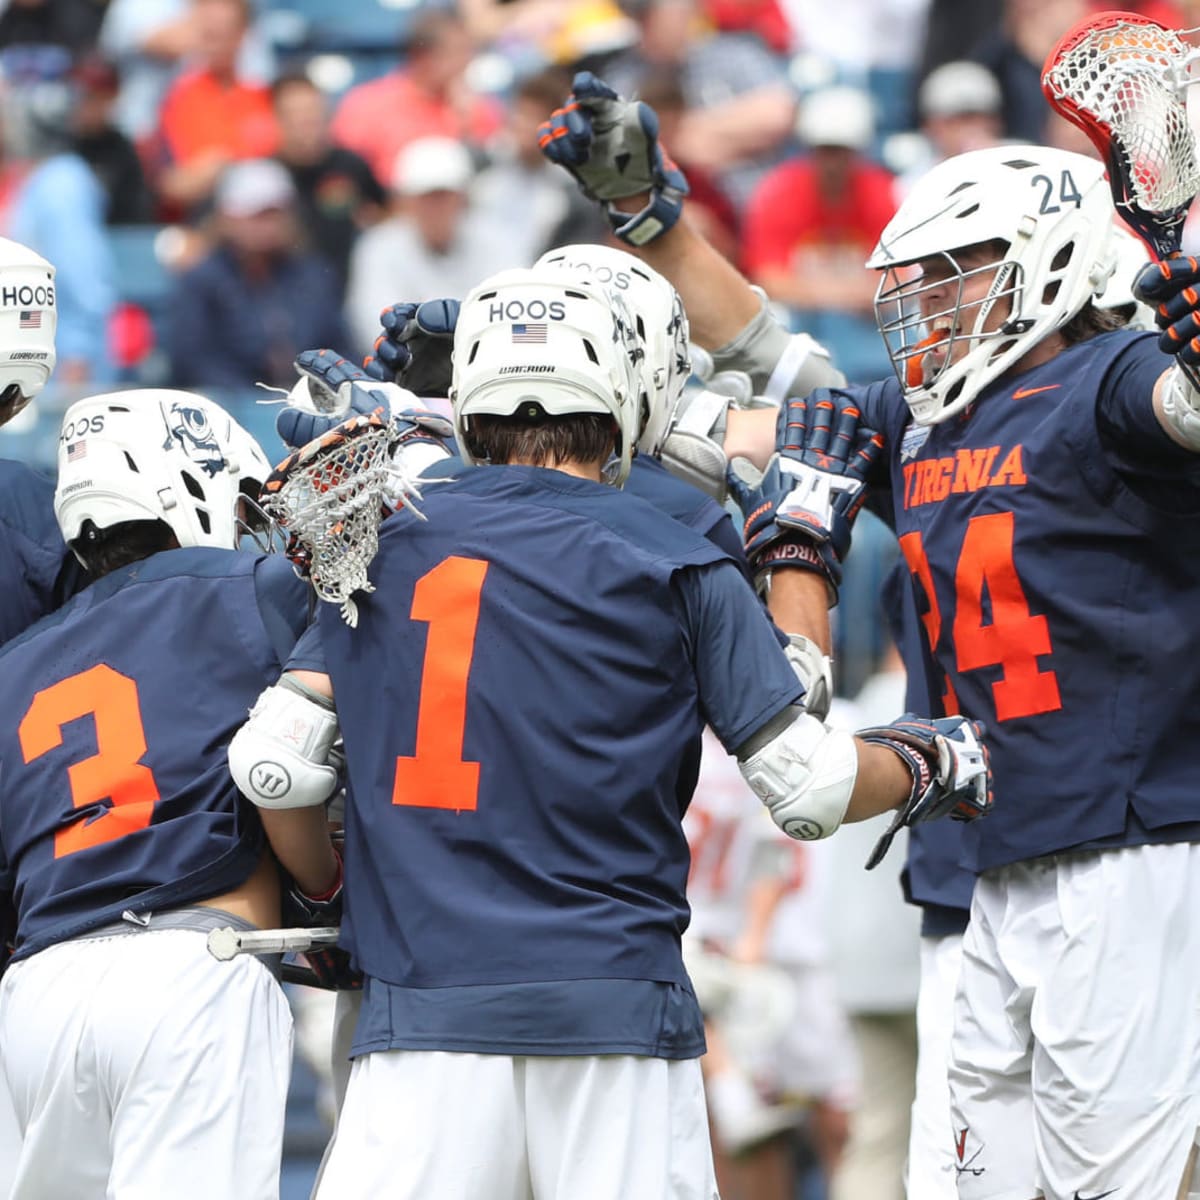 Maryland Lacrosse Schedule 2022 2022 Virginia Men's Lacrosse Schedule Revealed - Sports Illustrated  Virginia Cavaliers News, Analysis And More